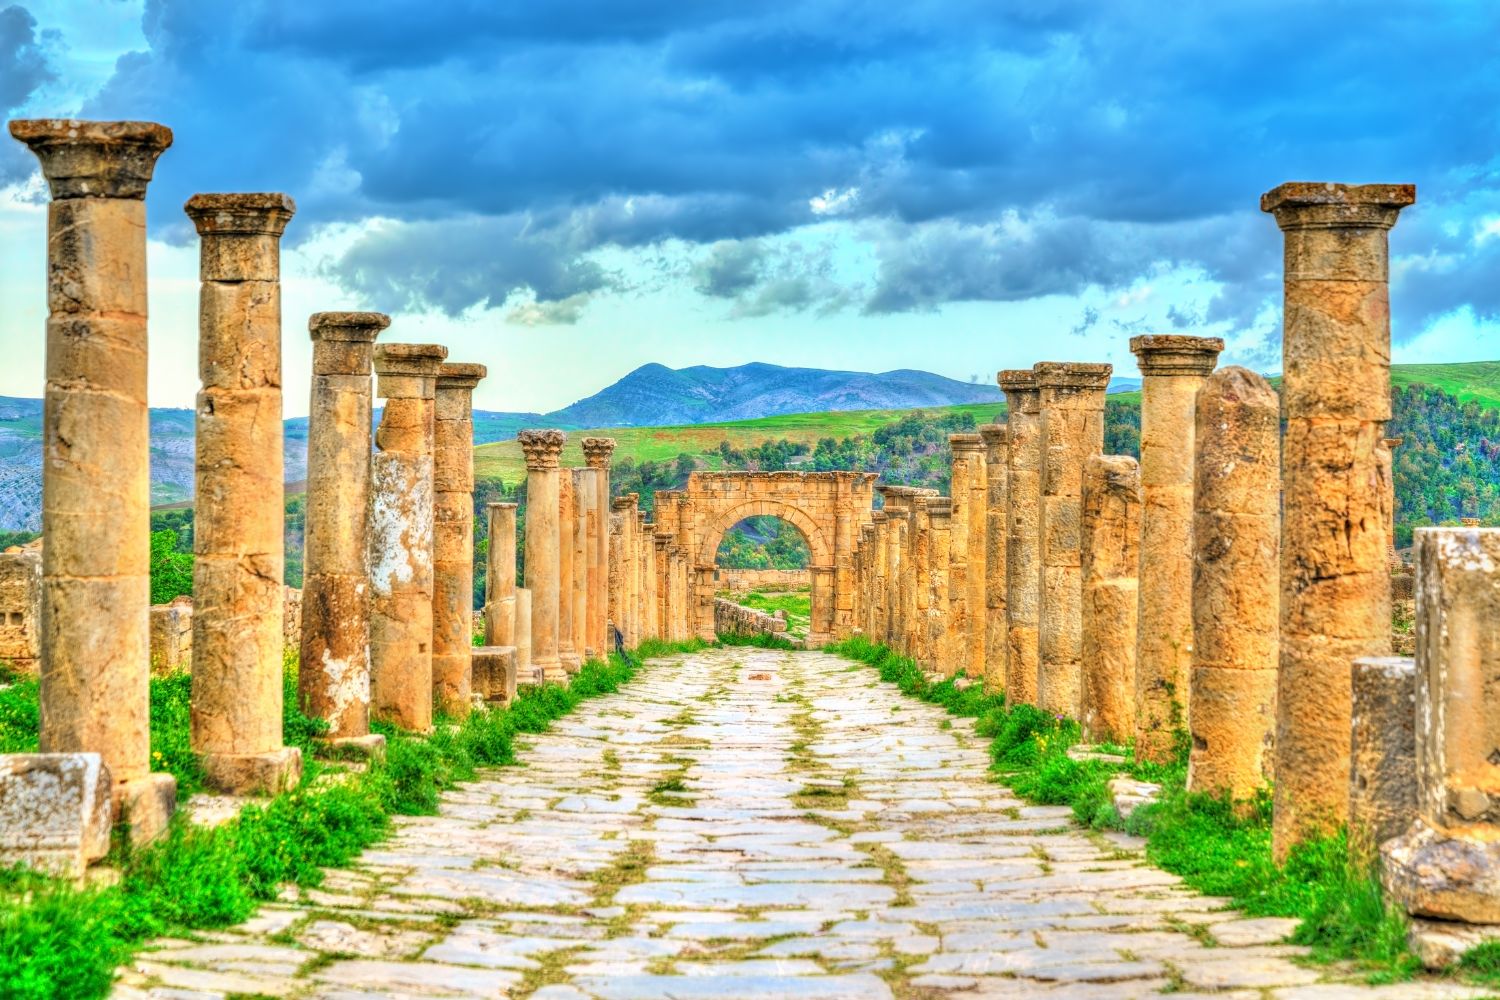 Geography of Algeria: National Geographic Tapestry Roman Ruins of Djemila